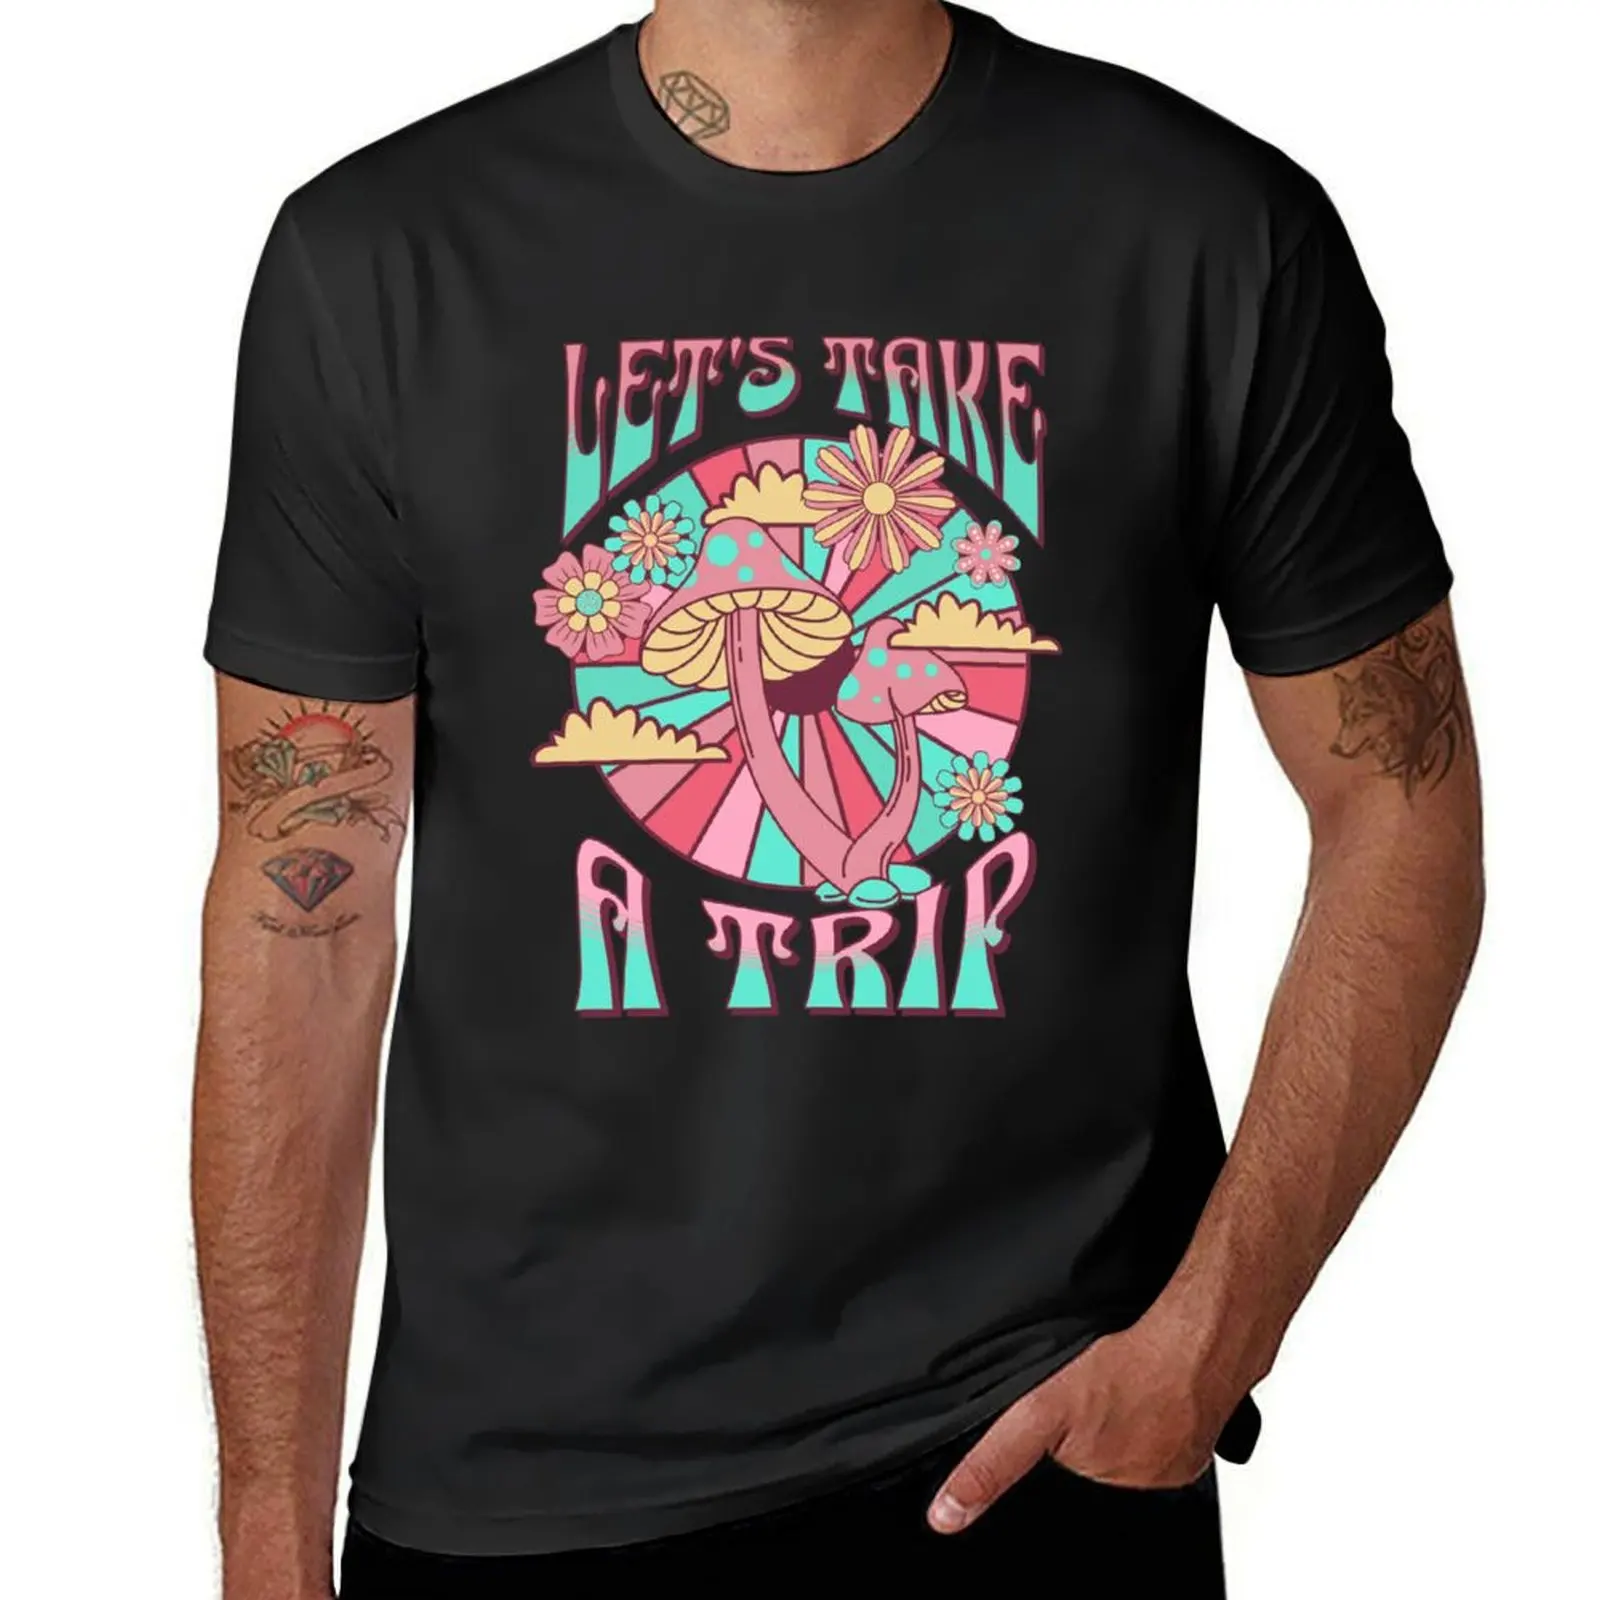 

Let's take a trip T-shirt aesthetic clothes quick drying men t shirt